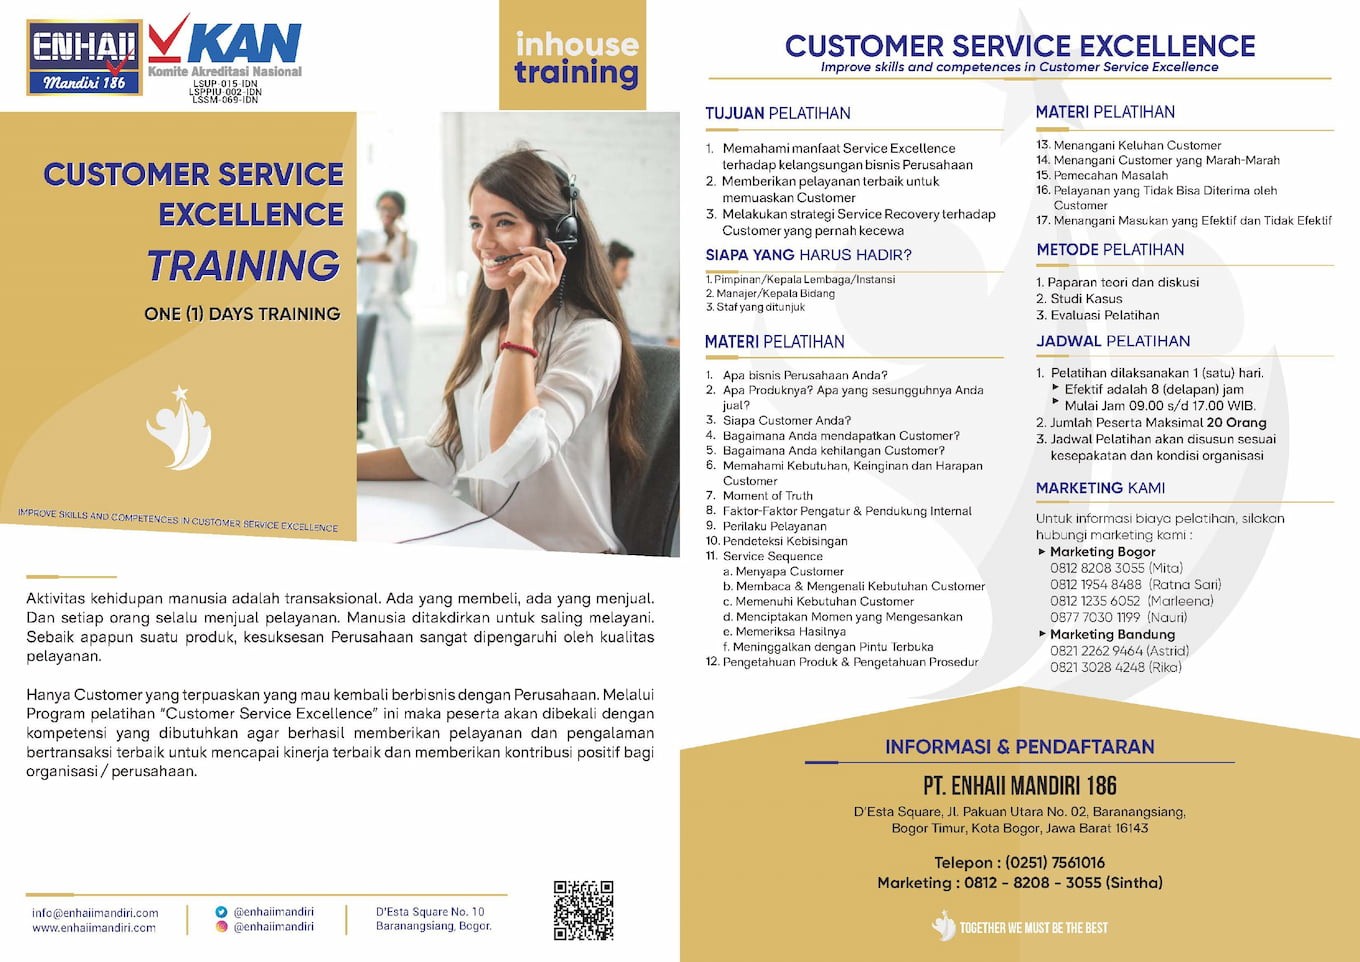 Detail Contoh Service Excellence Nomer 39